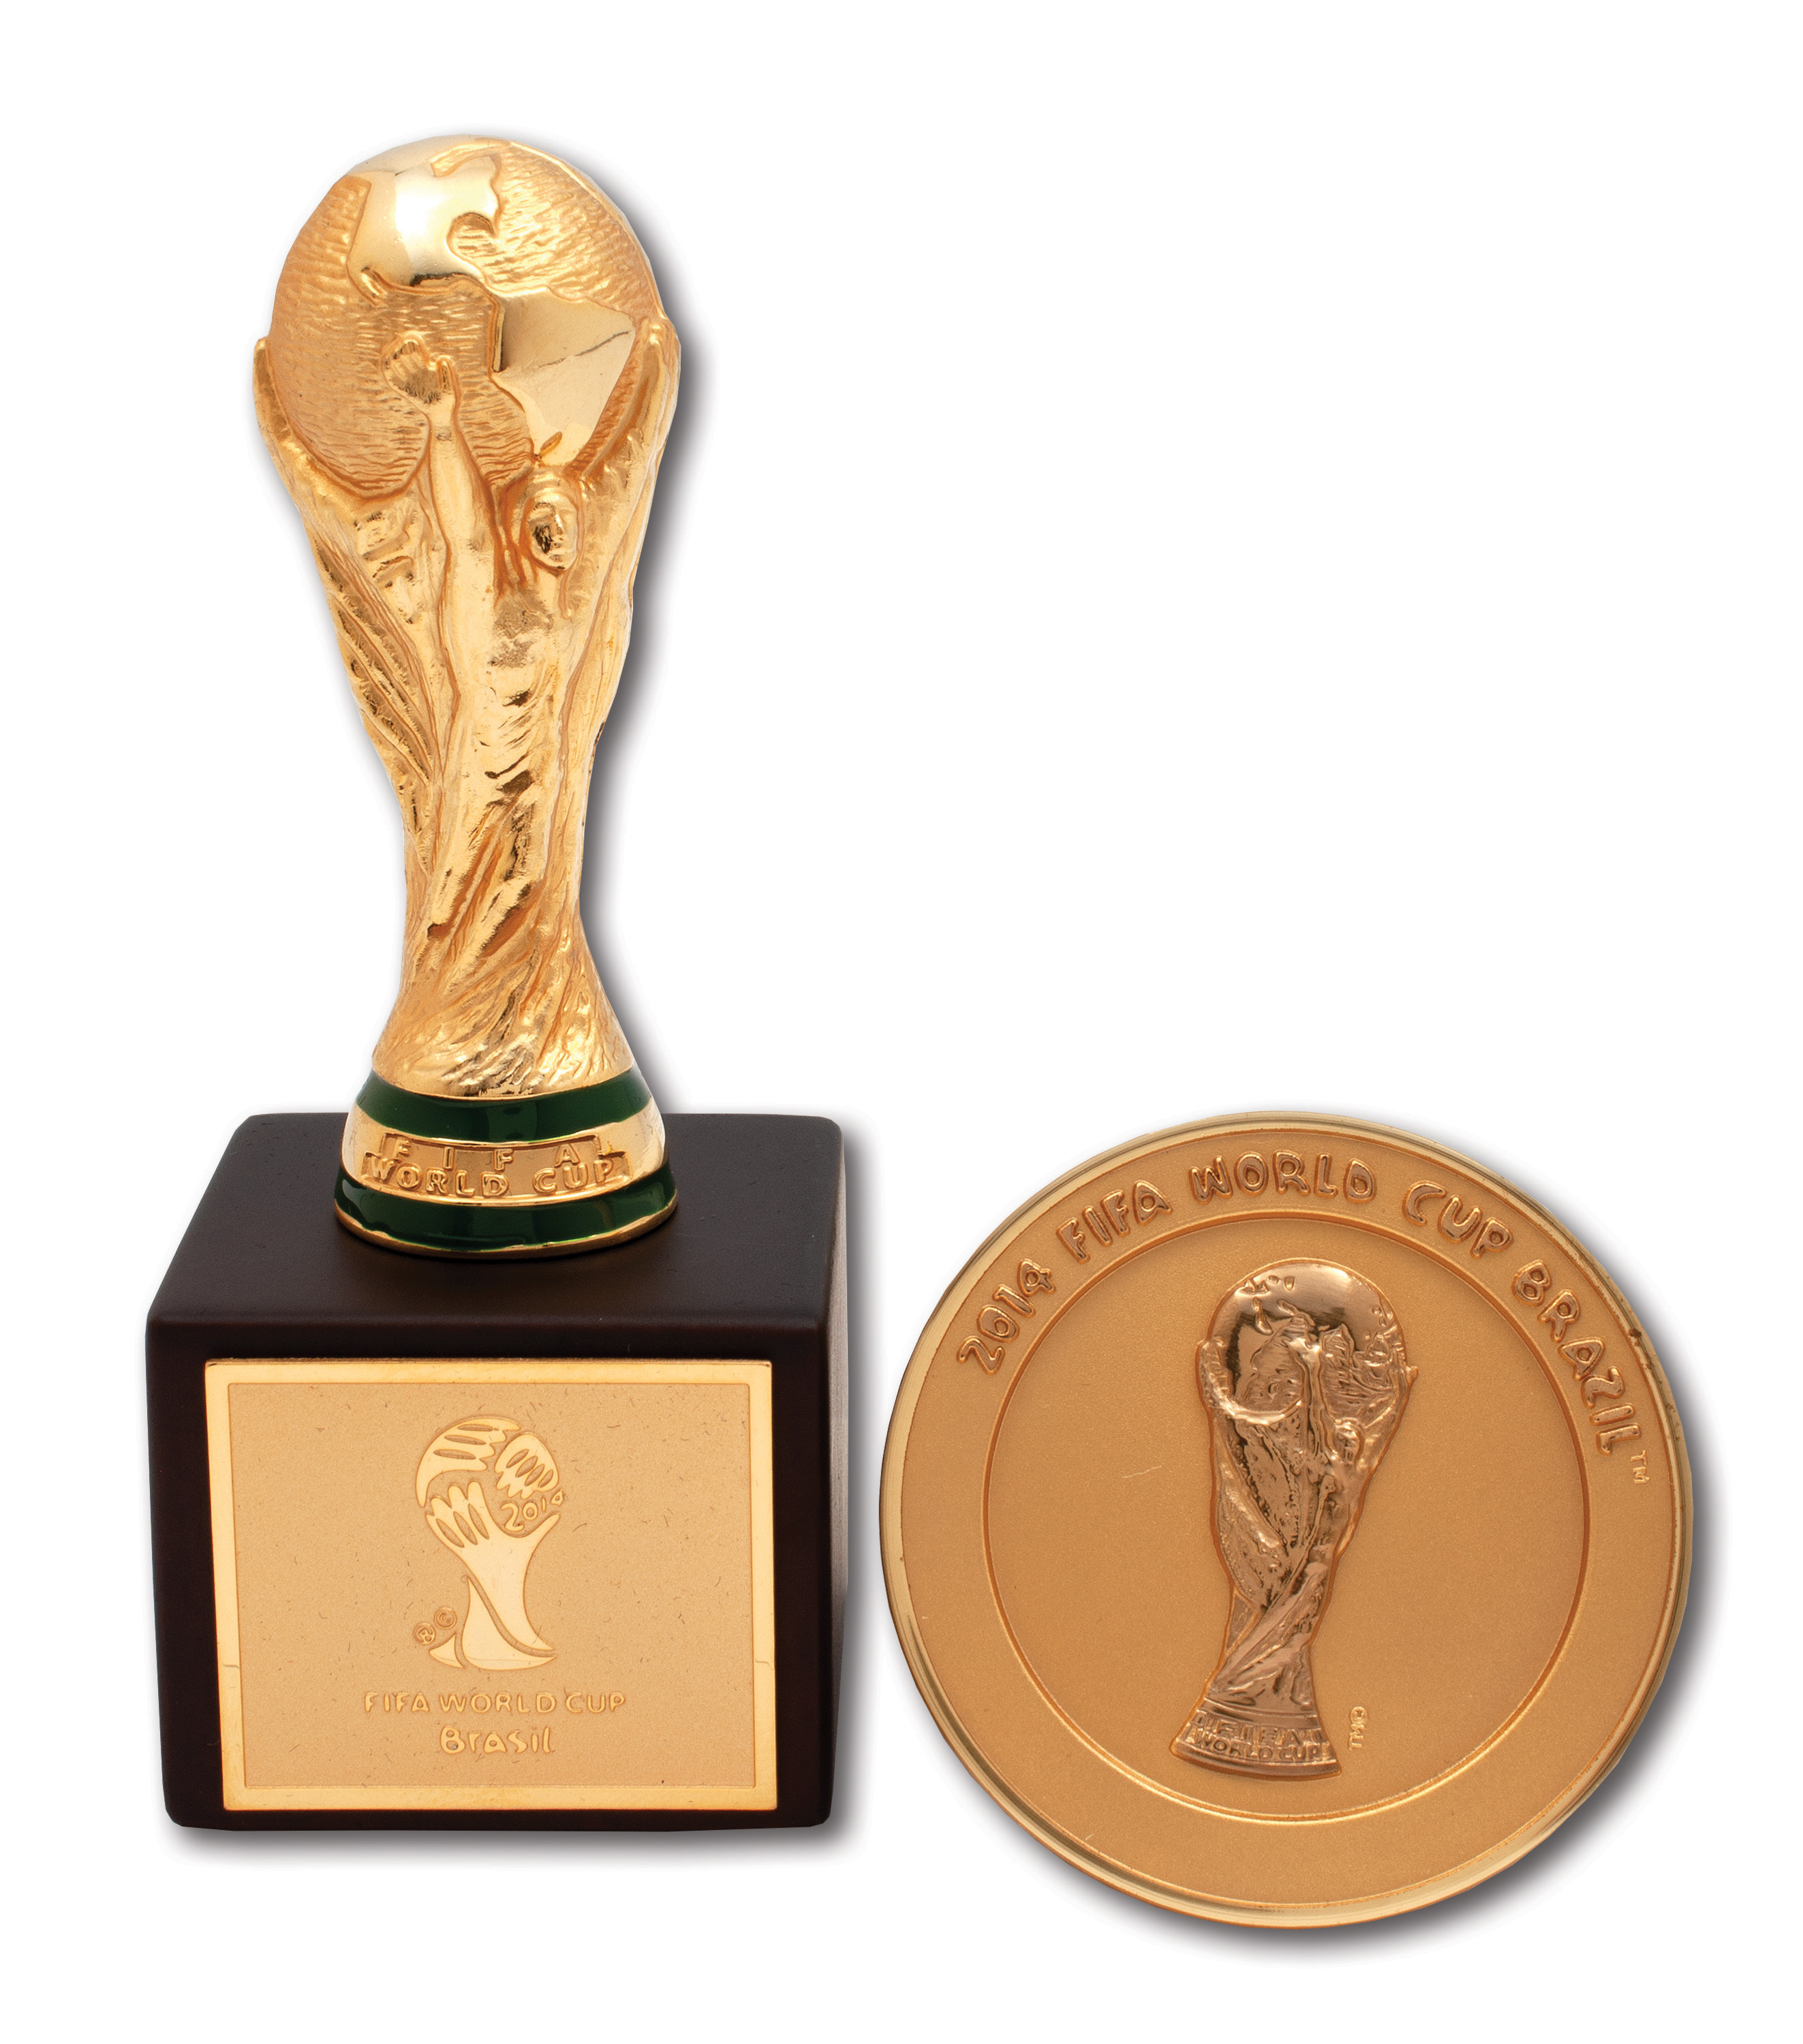 Lot Detail - 2014 FIFA WORLD CUP (BRAZIL) PARTICIPANT FINAL COMPETITION  MEDAL AND MINI TROPHY GIVEN TO BRAZIL NATIONAL TEAM STAFF MEMBERS